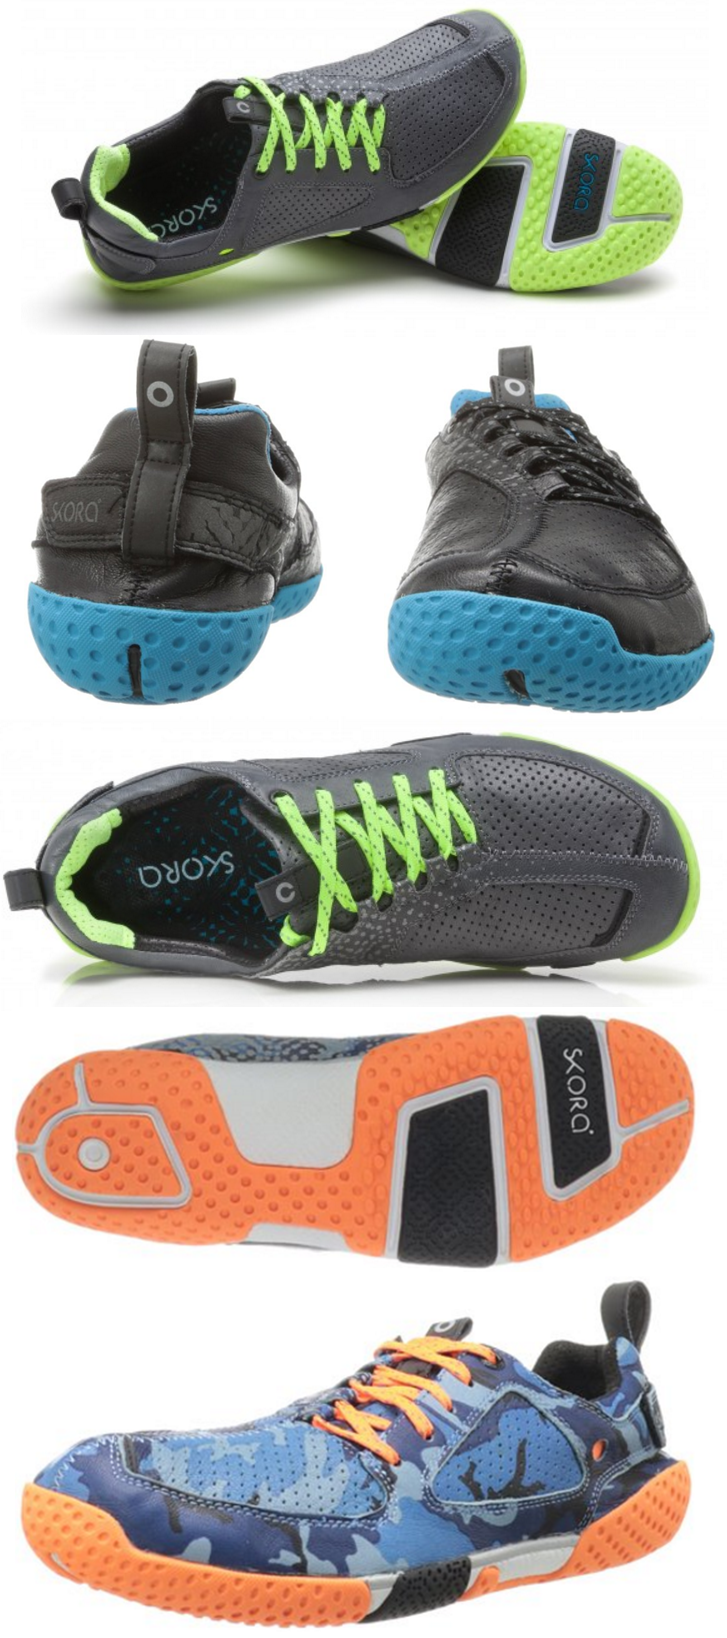 Skora Form Review for Forefoot Running